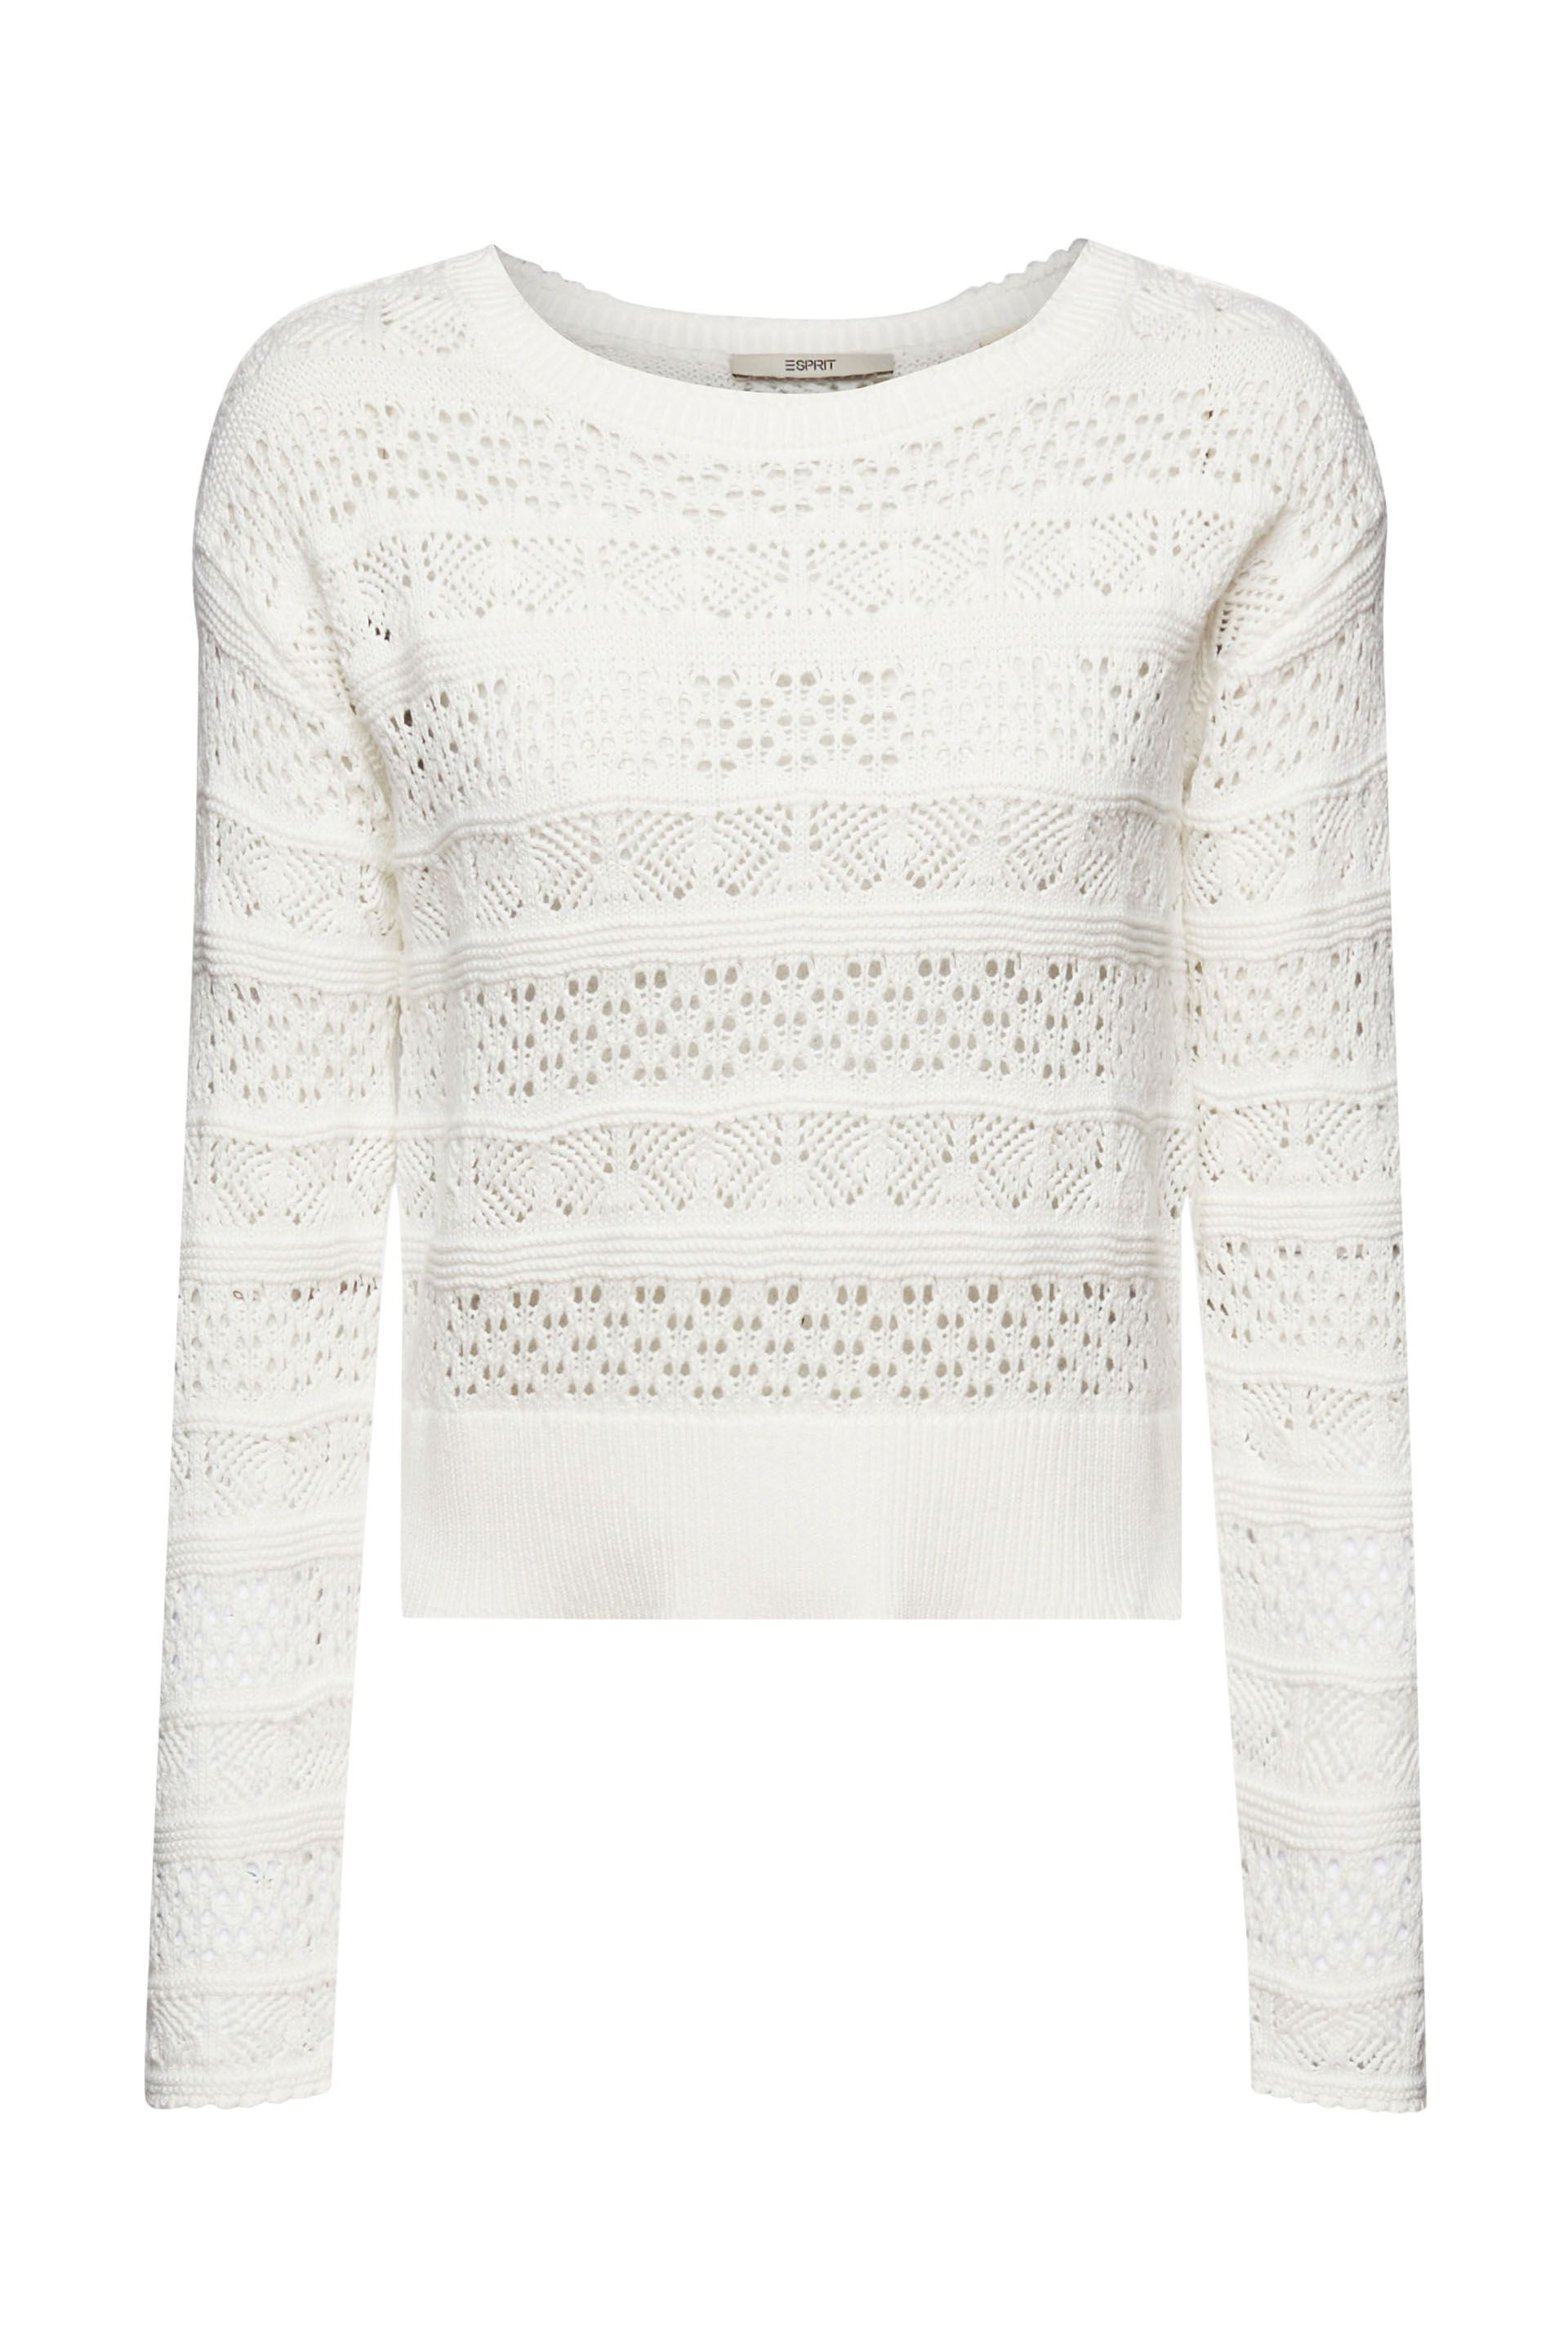 Esprit - Knitted pullover in cotton, White, large image number 0